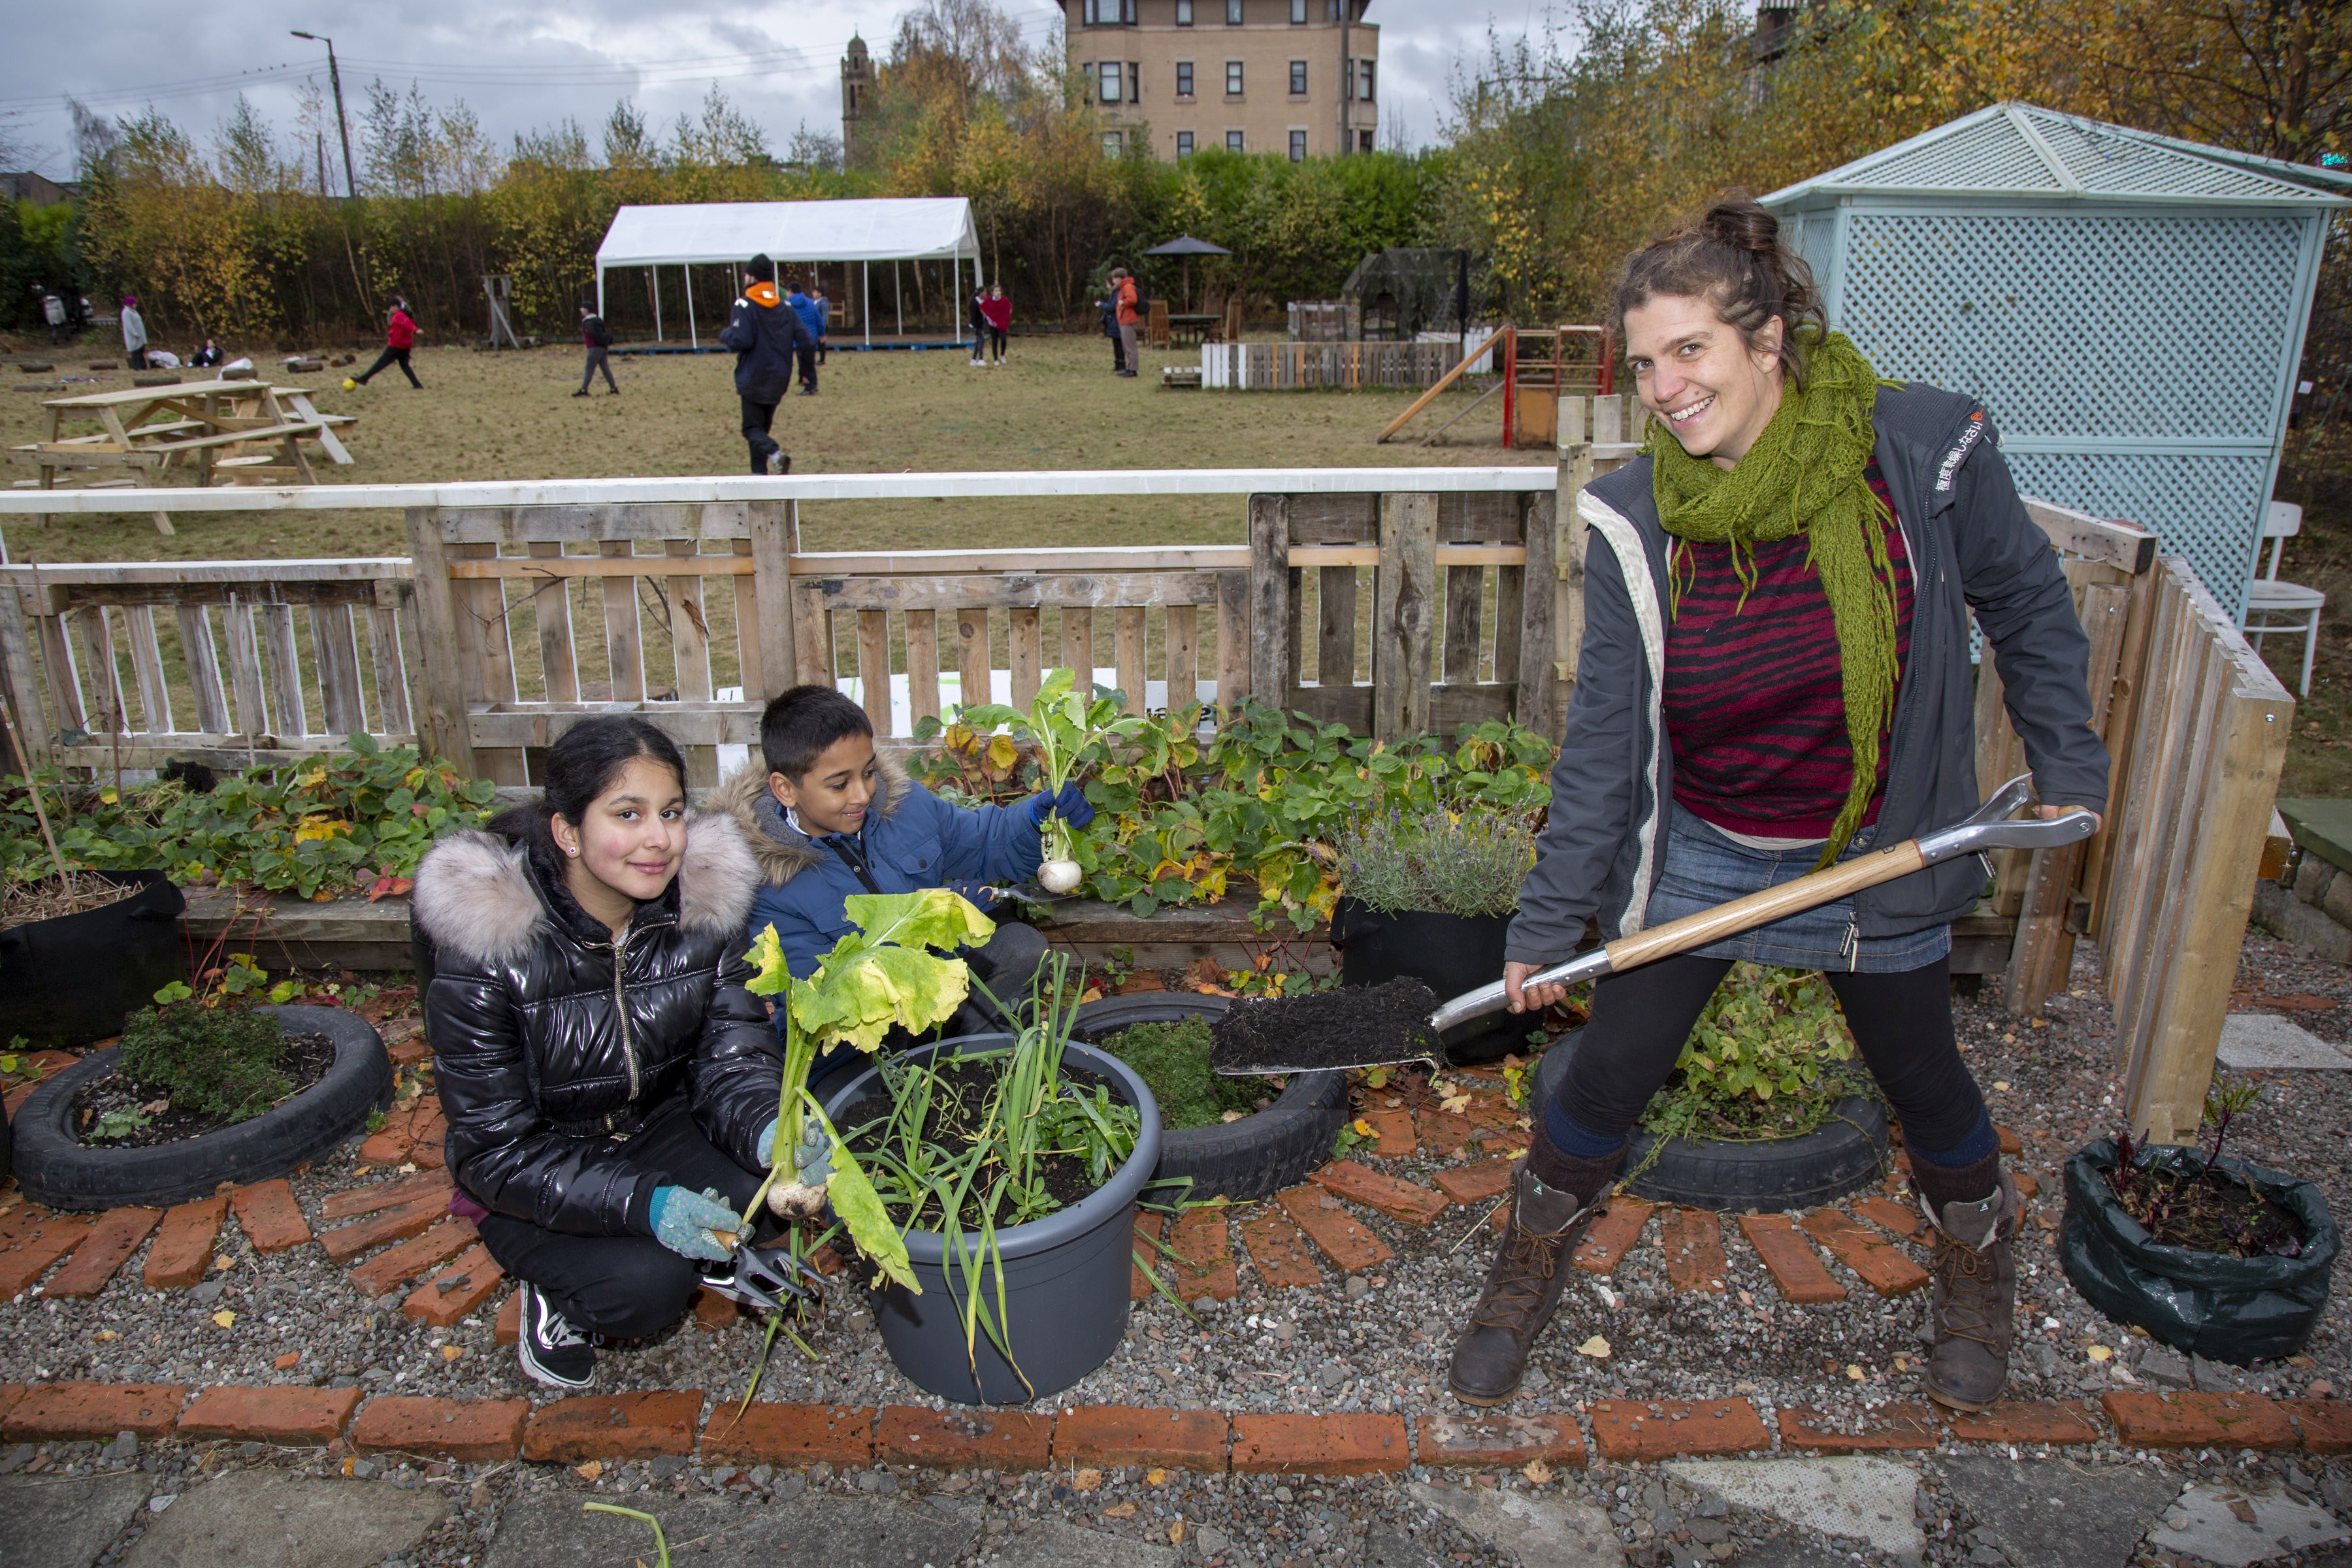 National Lottery boost brings Glasgow community food partners together to act on climate change